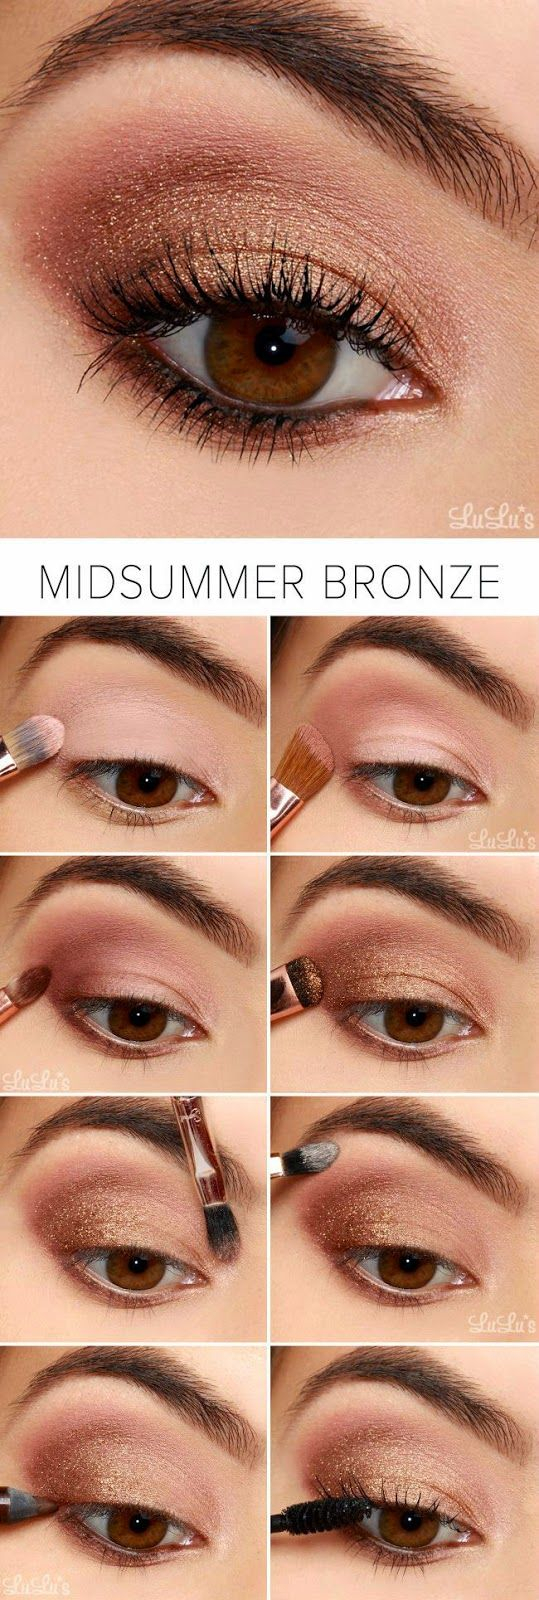 Party Eye Makeup Pictures Pakistani Latest Summer Makeup Ideas Trends 2019 2020 Beauty Tips